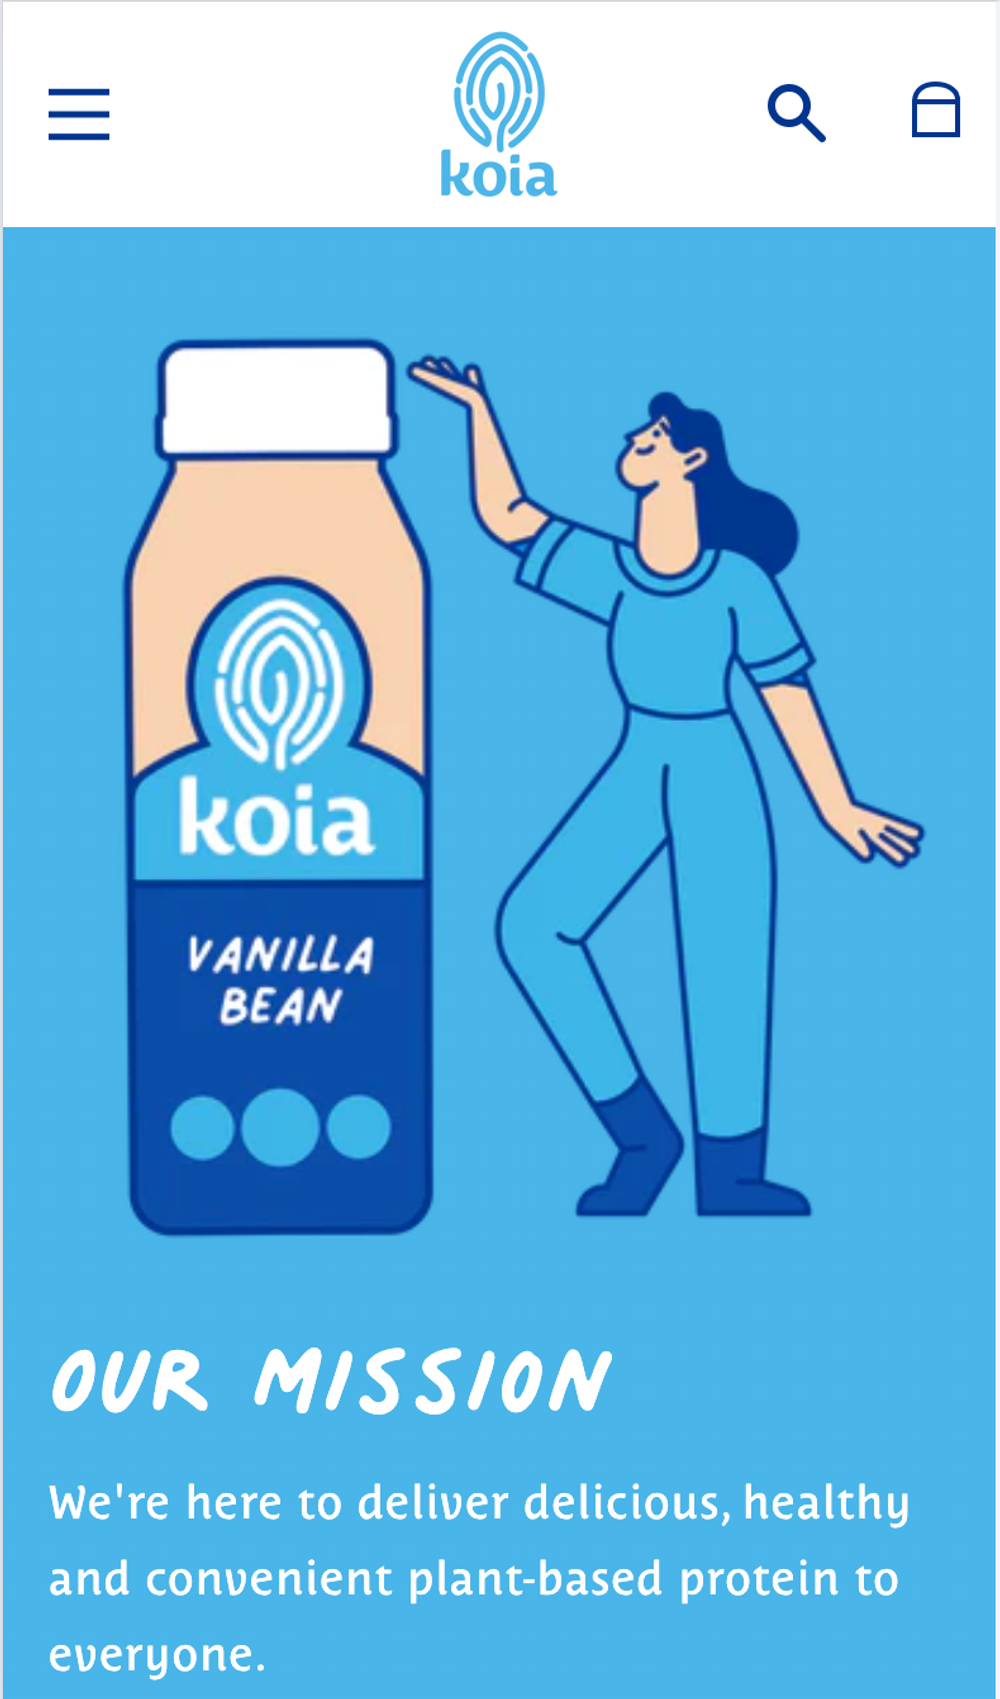 Koia featured section example